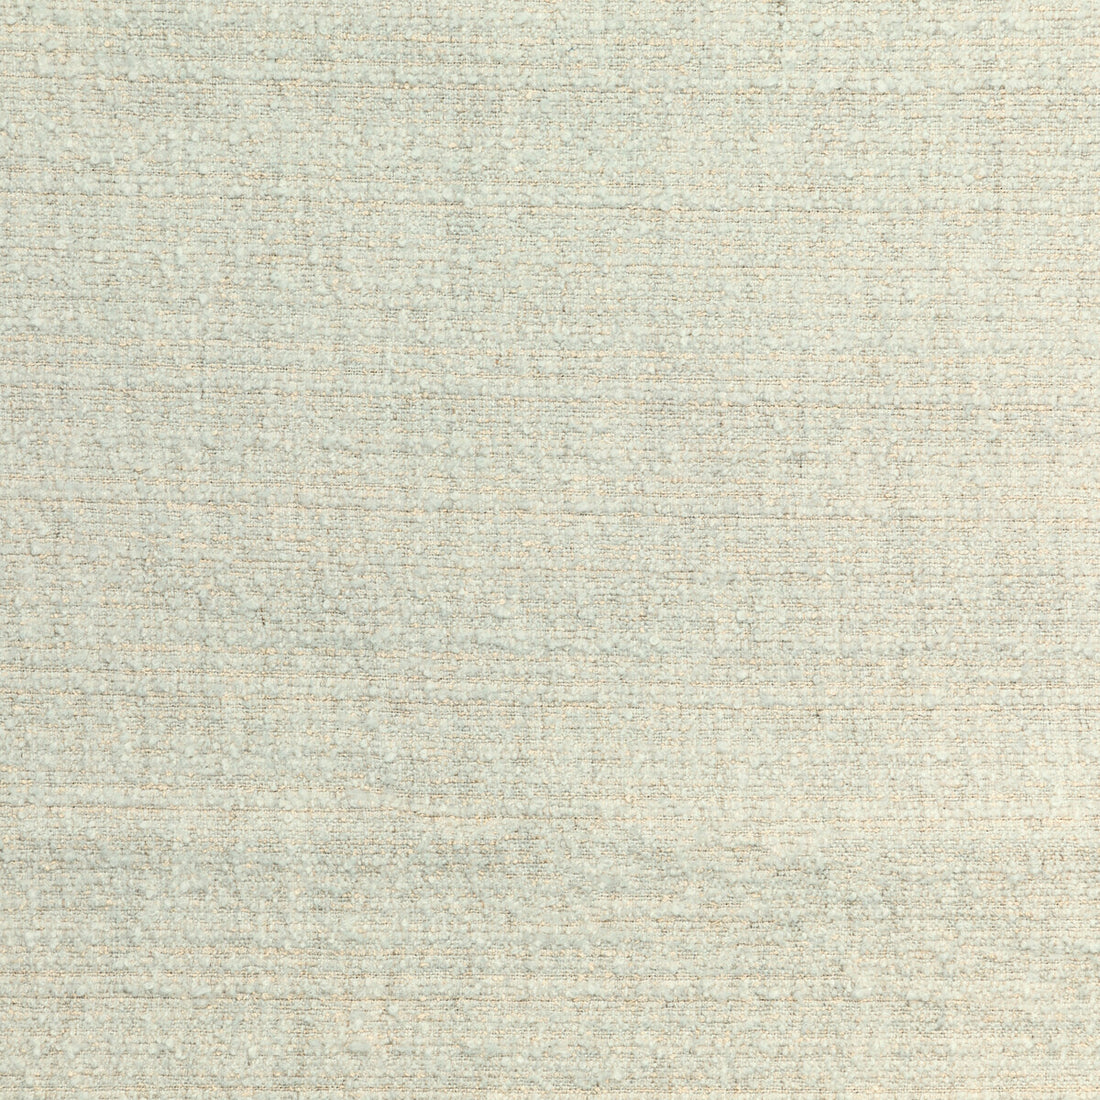 Lune fabric in salt color - pattern GWF-3767.1.0 - by Lee Jofa Modern in the Kelly Wearstler VI collection